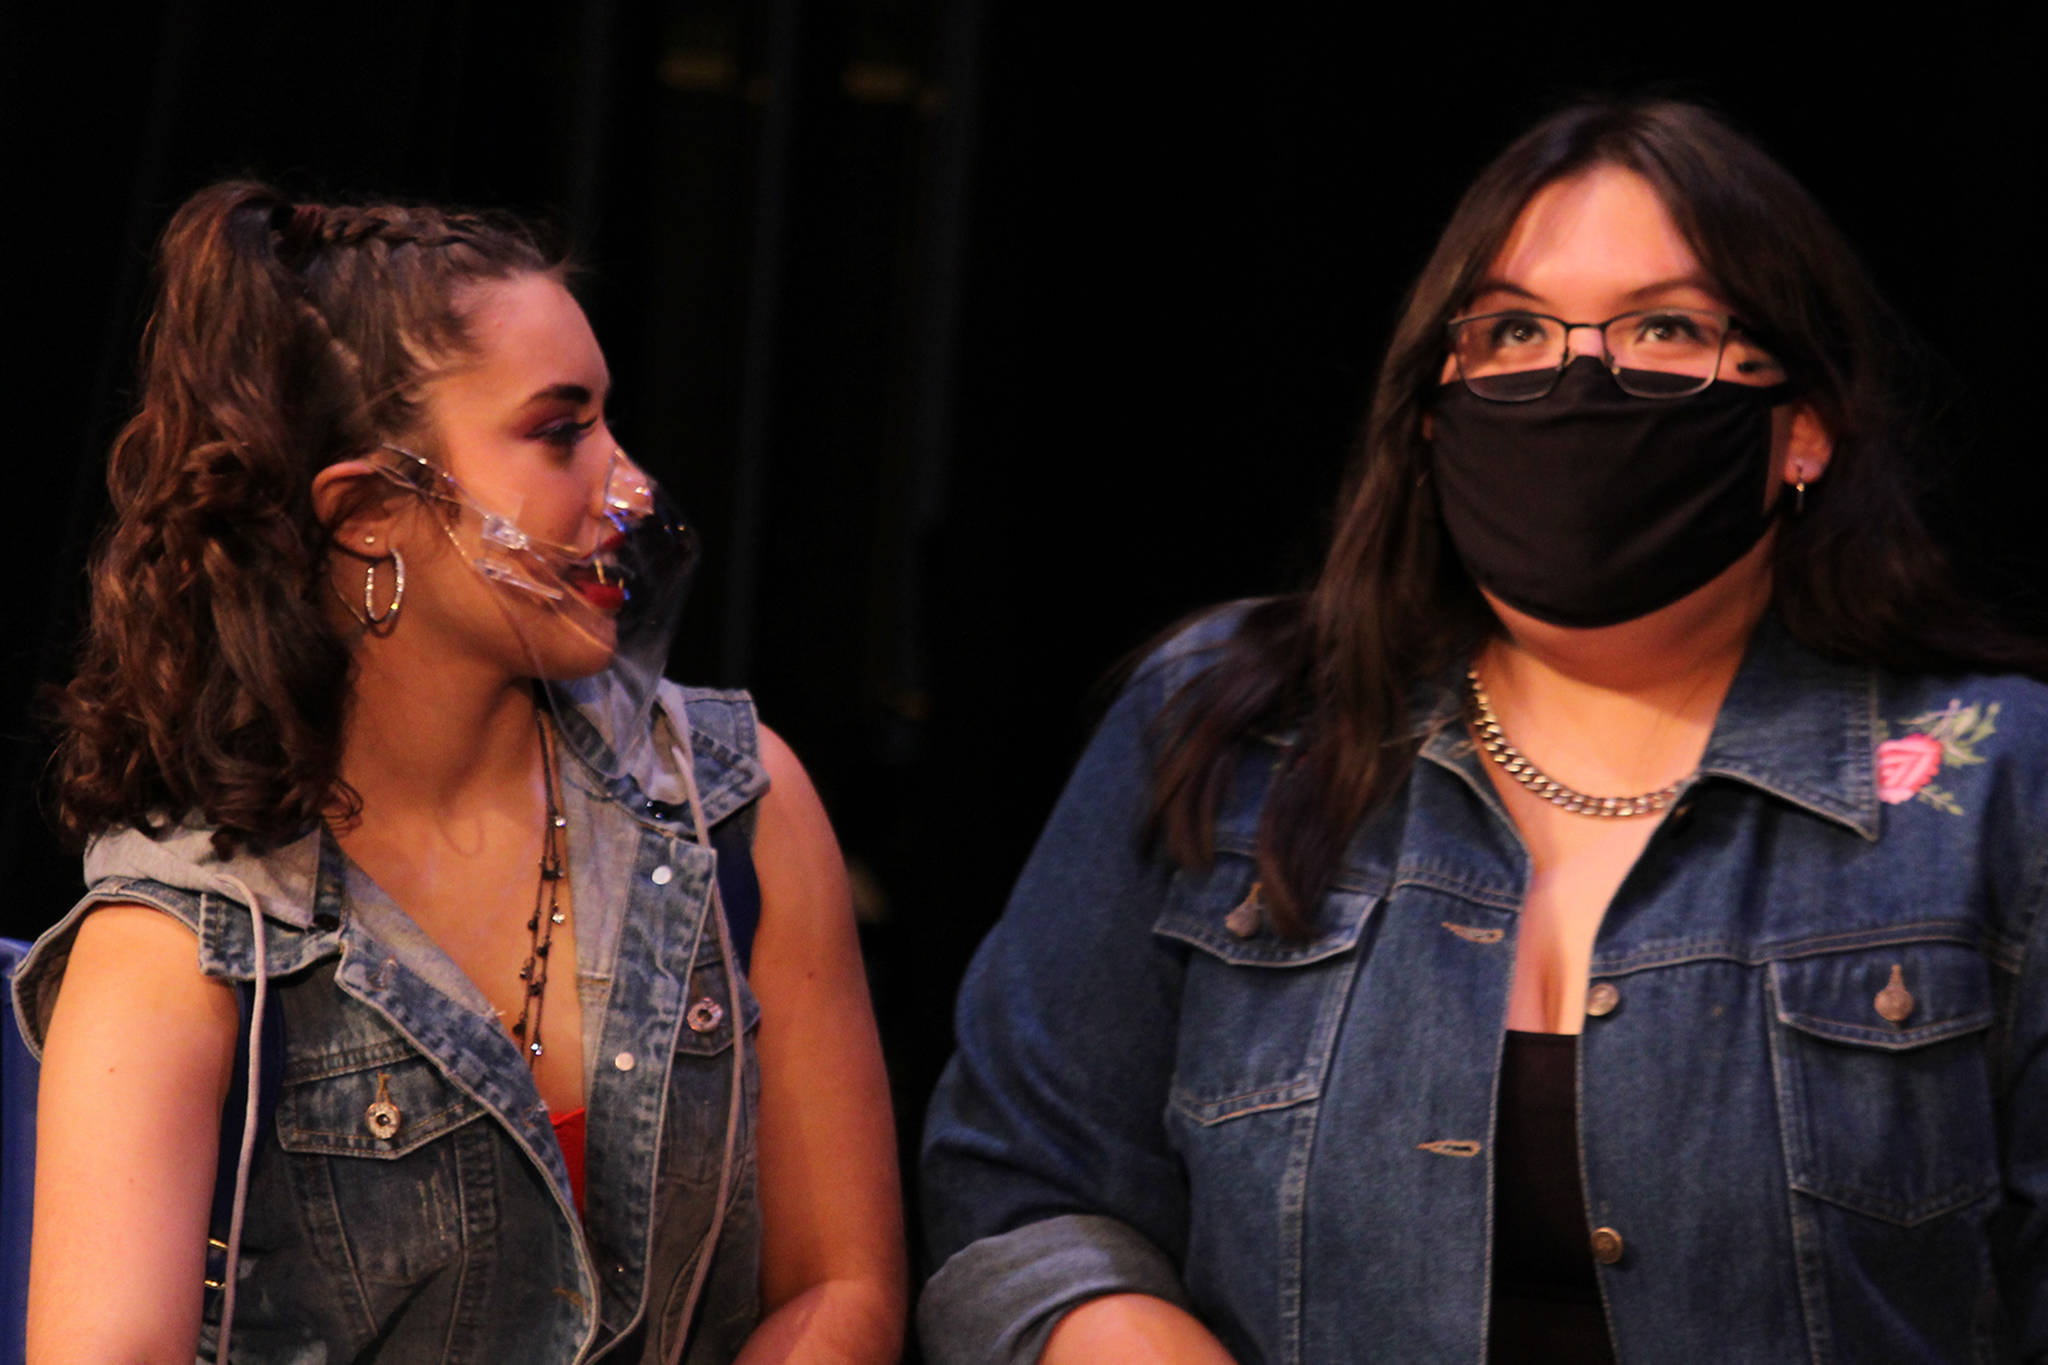 Clara Smith talks to Jaylynn Martin in a scene during rehearsal for “Fame: The Musical.” Masks are part of the mitigation measures the production adopted in light of the pandemic. Additionally, the show, which opens Friday evening, will be livestreamed instead of performed in front of a full auditorium. (Ben Hohenstatt / Juneau Empire)